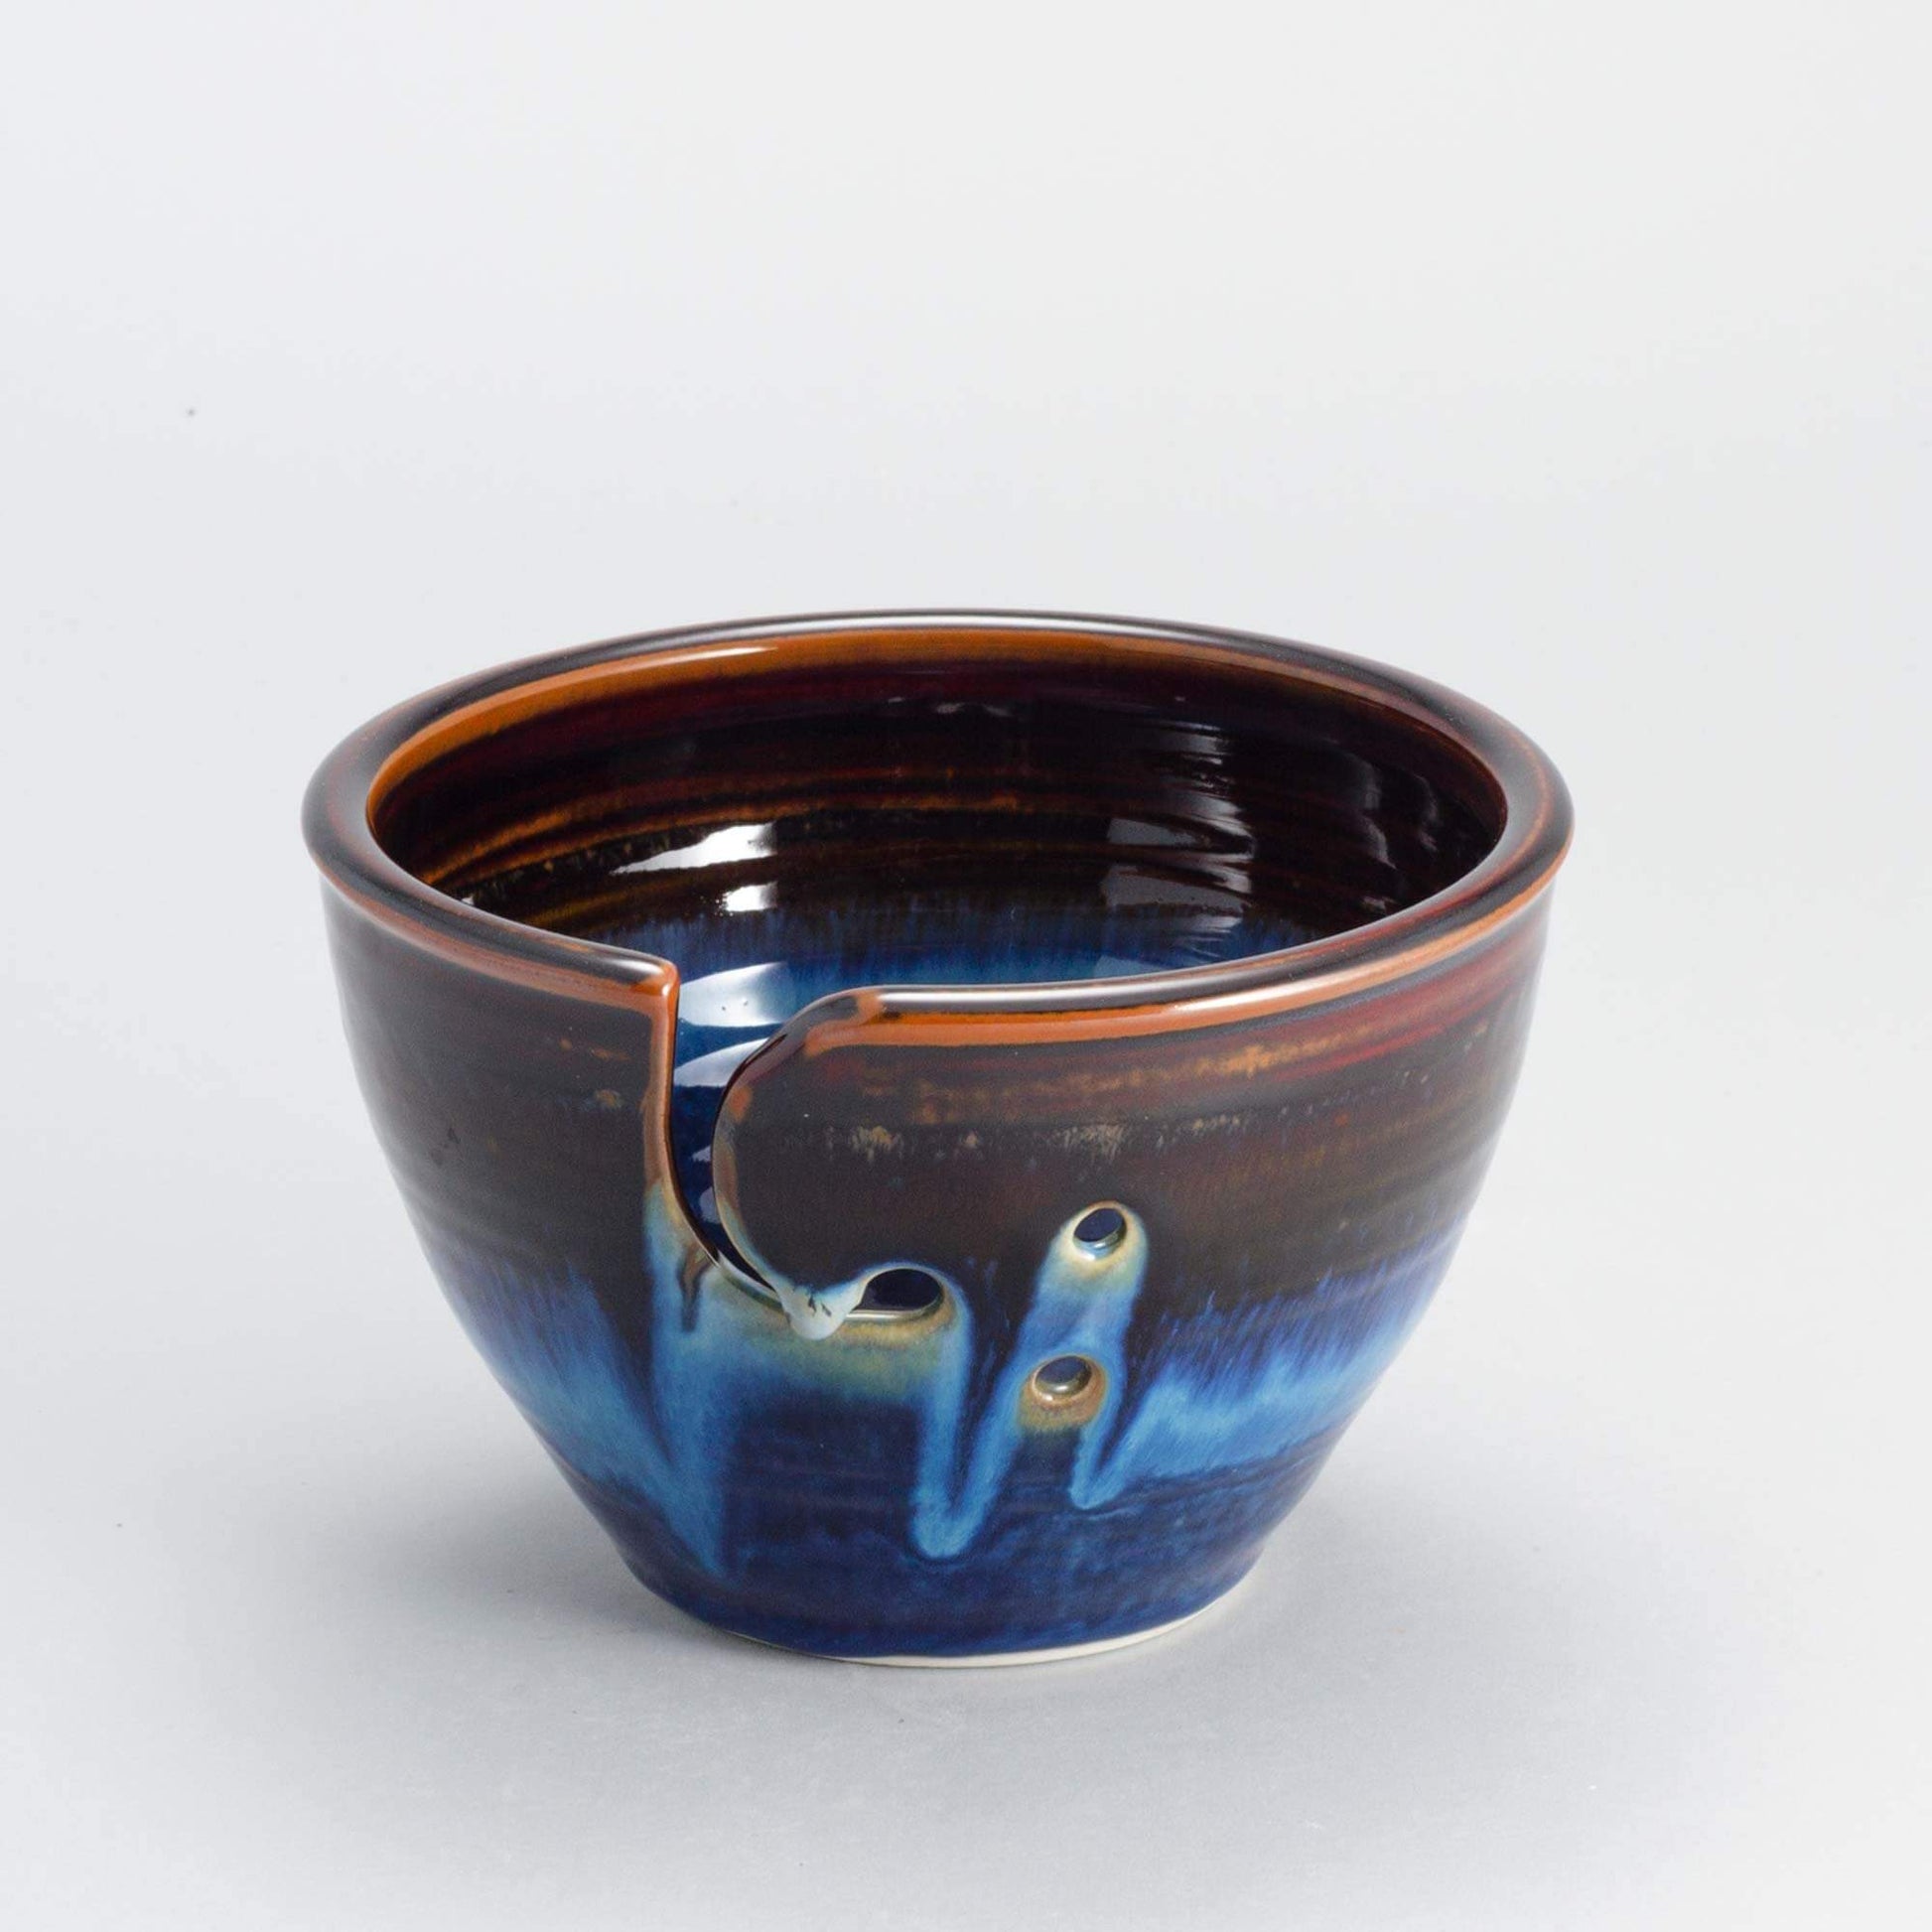 Handmade Pottery Knitting Bowl in Blue Hamada pattern made by Georgetown Pottery in Maine